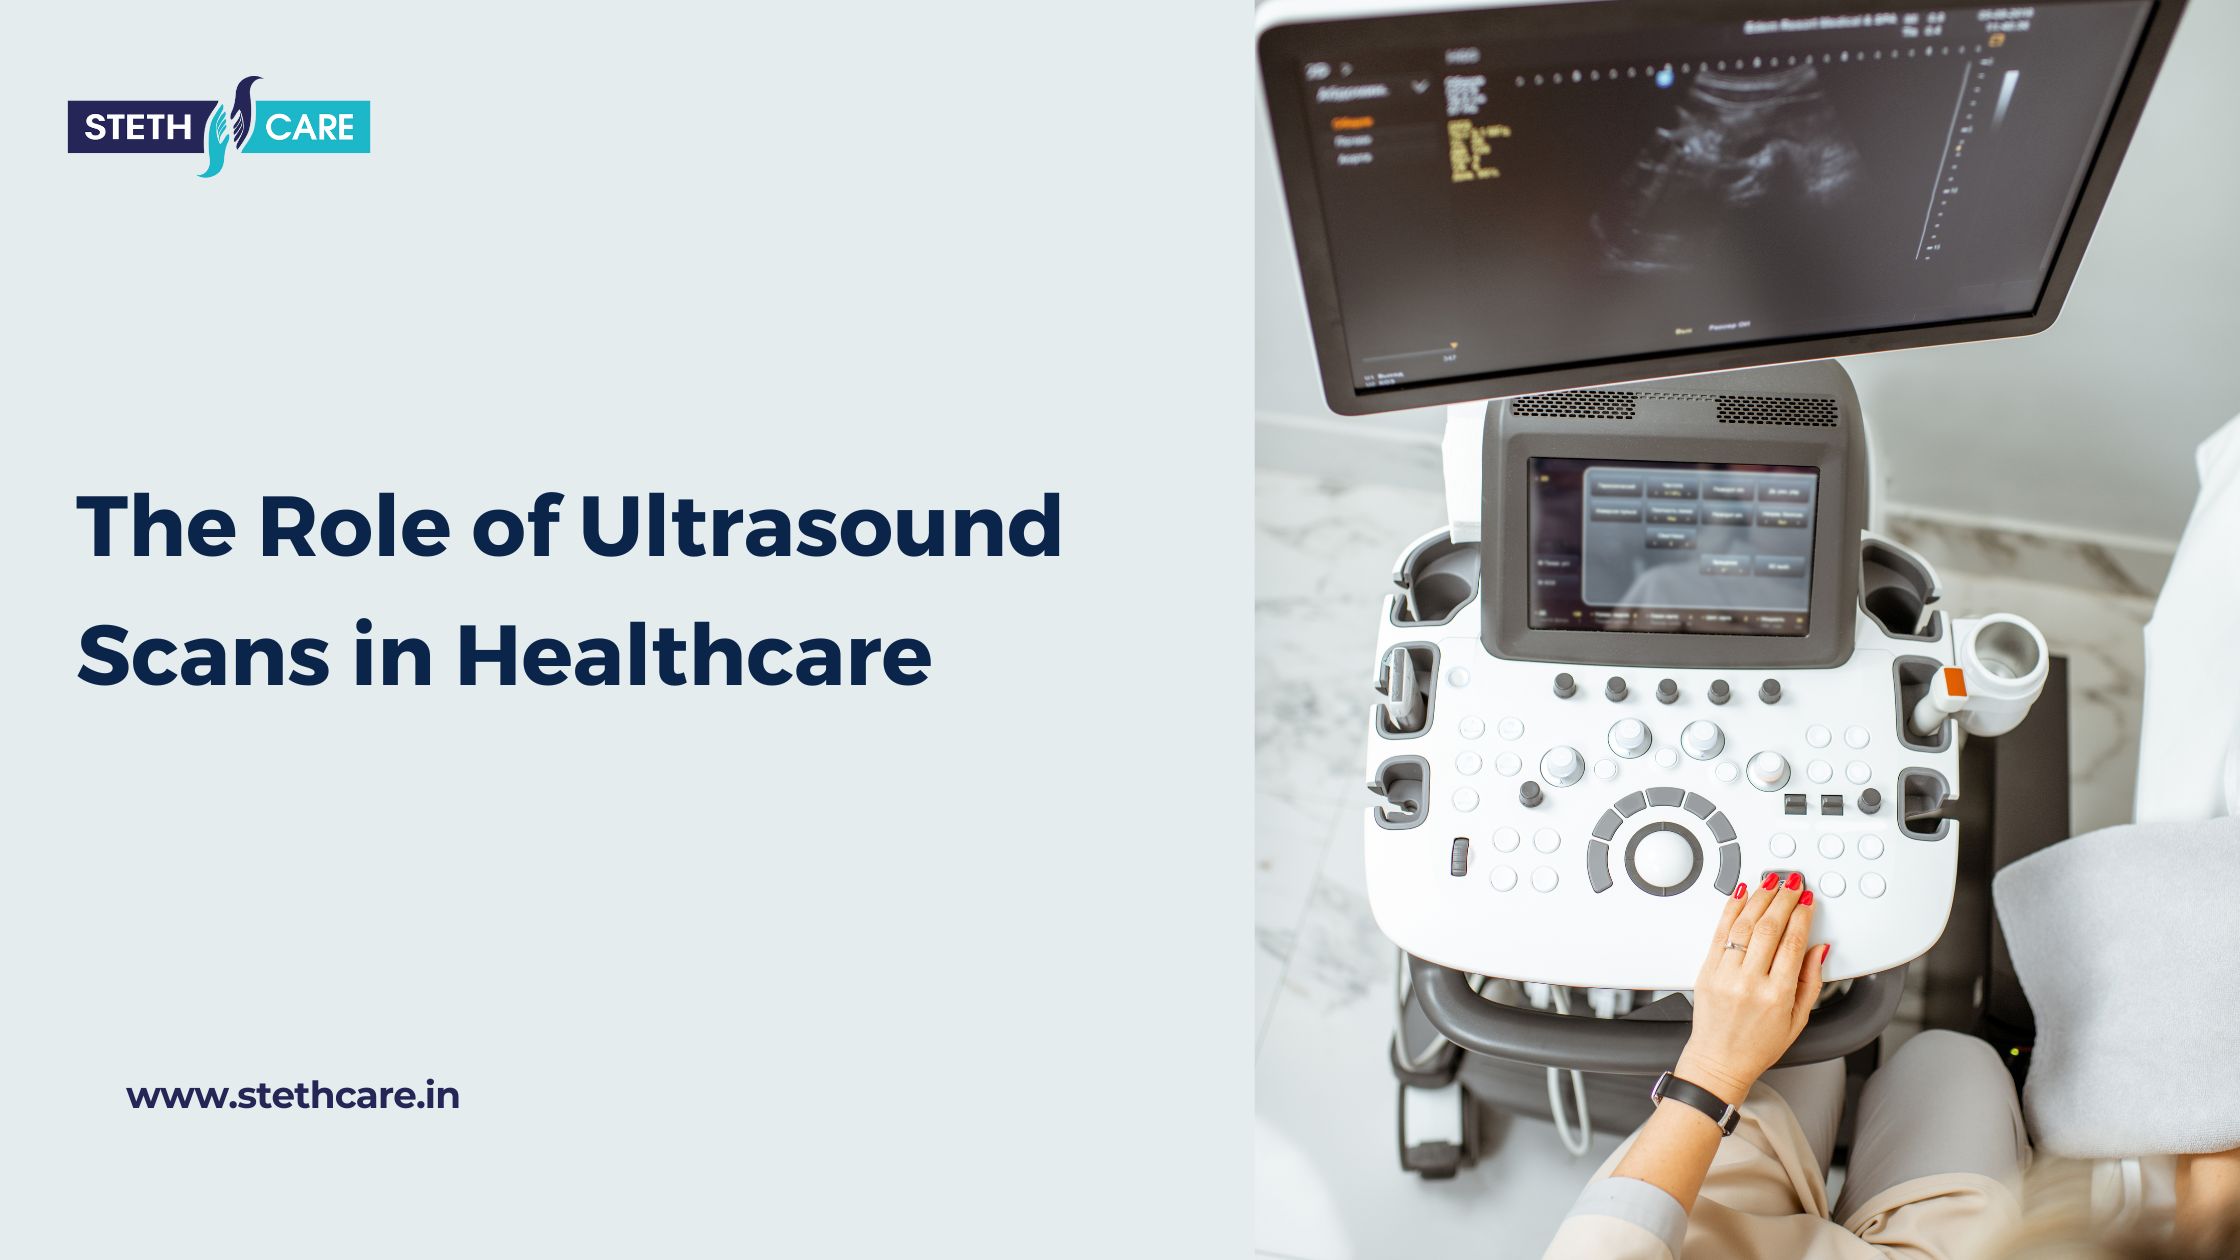 The Role of Ultrasound Scans in Healthcare